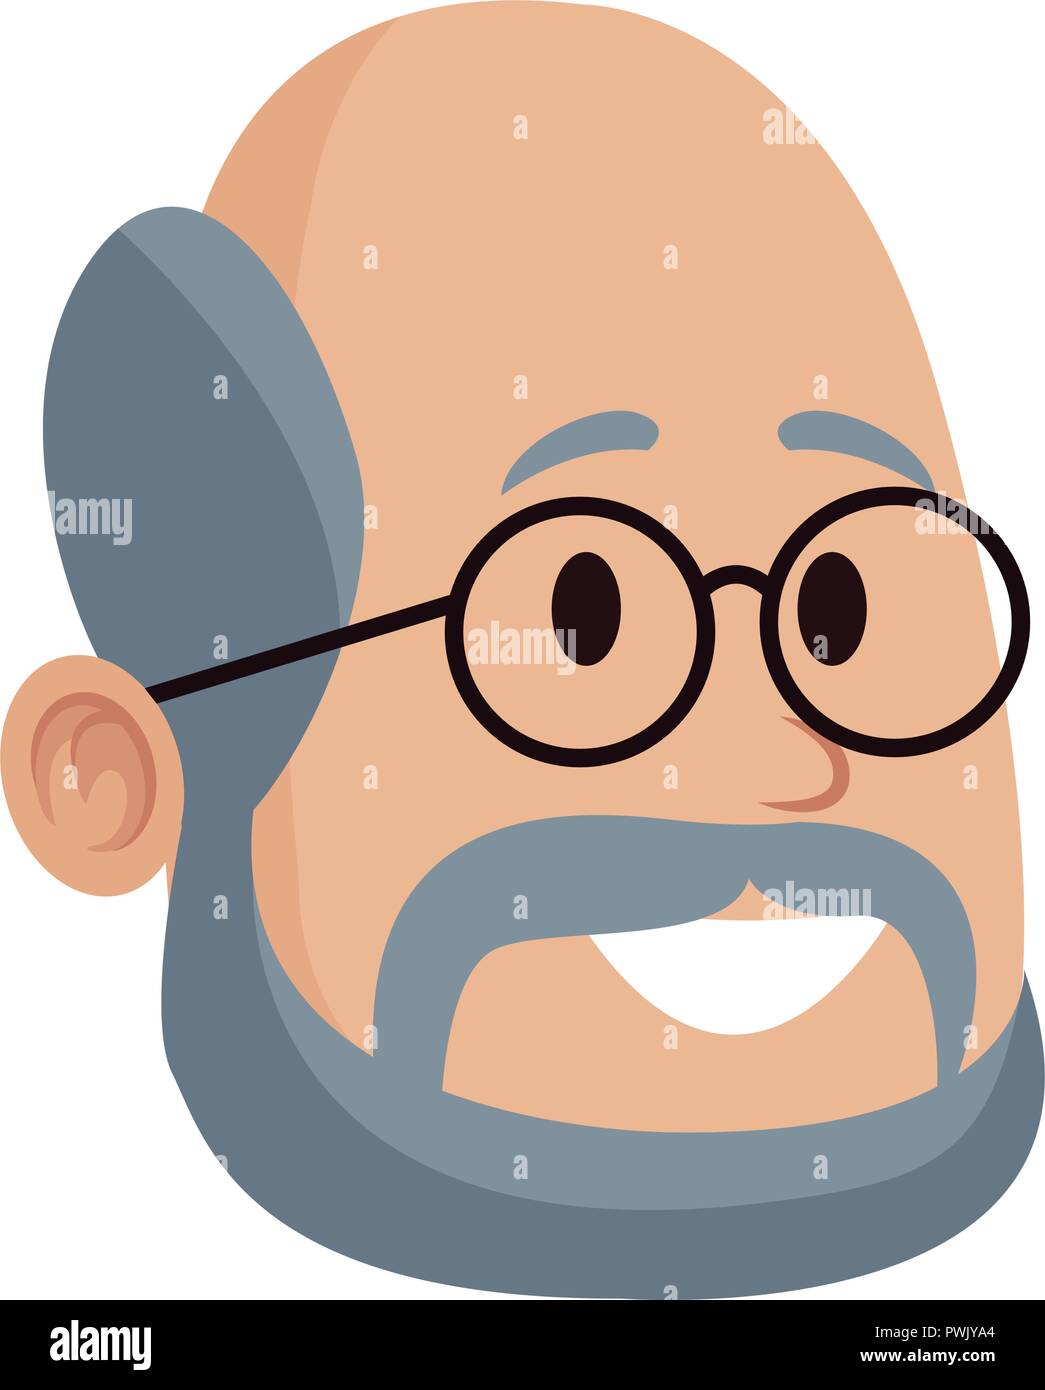 Adult man face smiling with glasses cartoon vector illustration graphic design Stock Vector